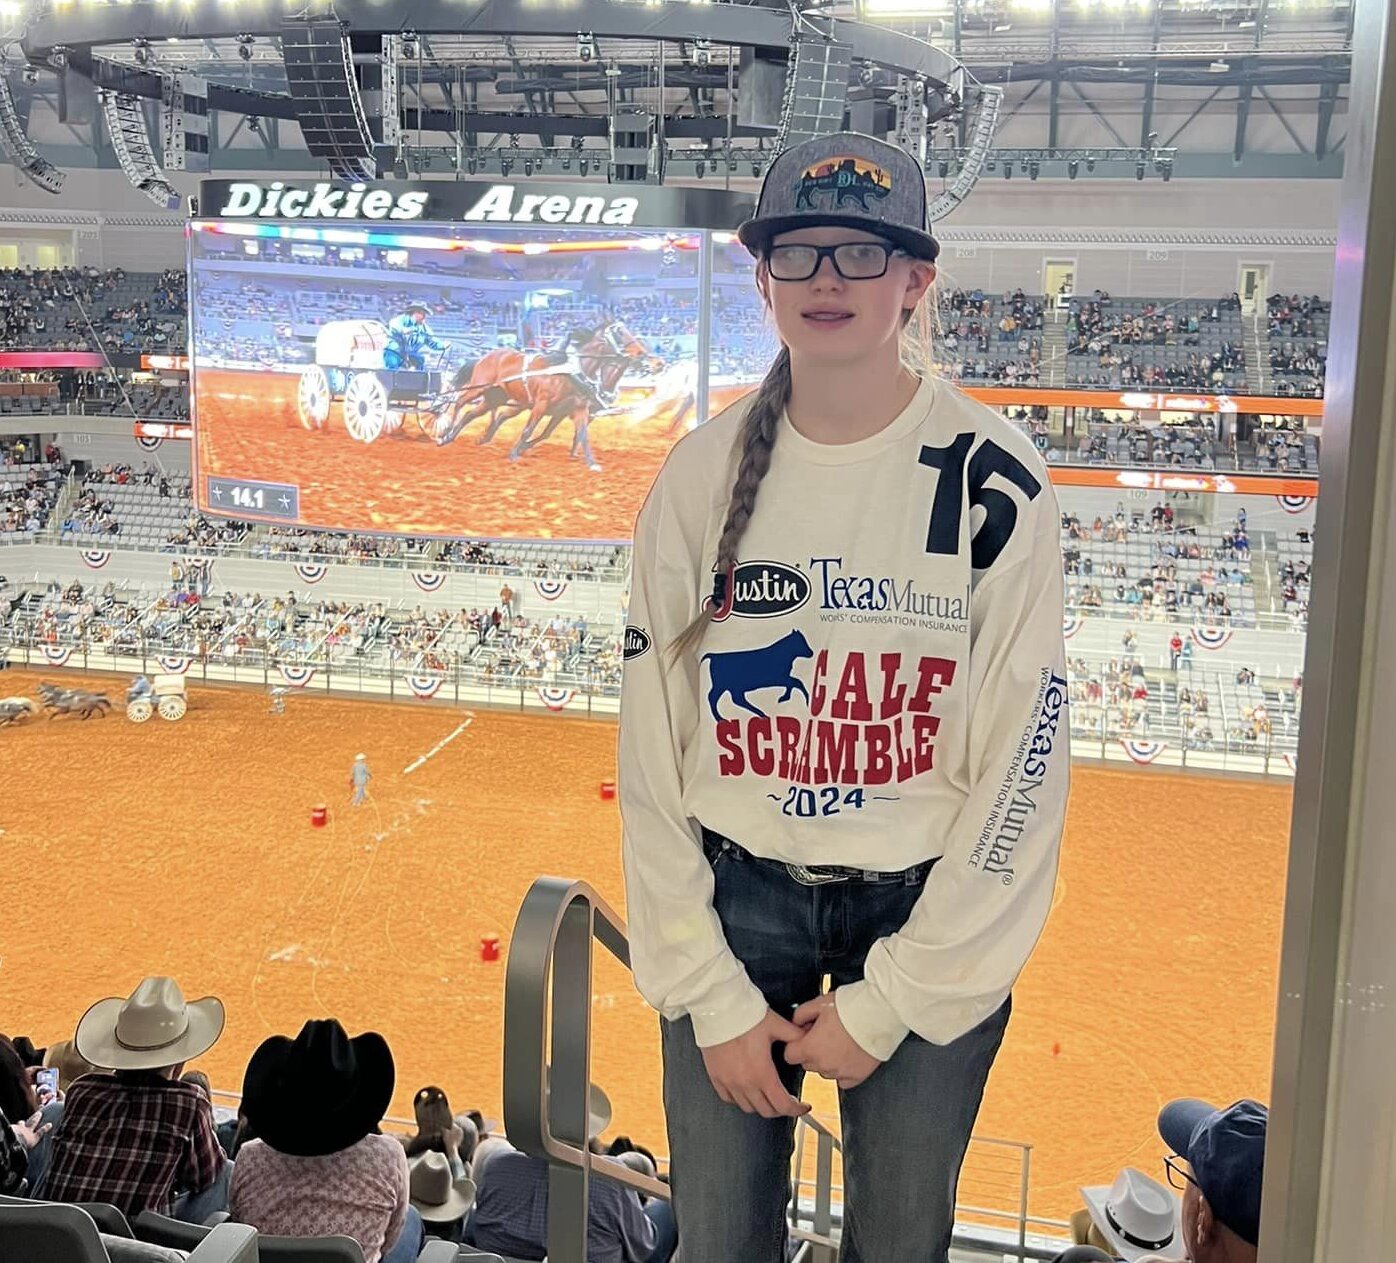 Springtown High School freshman Zoey Sheets caught a calf in the Jan. 31 Calf Scramble at the Fort Worth Stock Show and Rodeo. Youth that catch a calf are awarded a $500 certificate to purchase a heifer to raise and show at Fort Worth the following year. The Calf Scramble’s greatest impact may be its dedication and commitment to the students and their future education. Students who catch are eligible for scholarships.